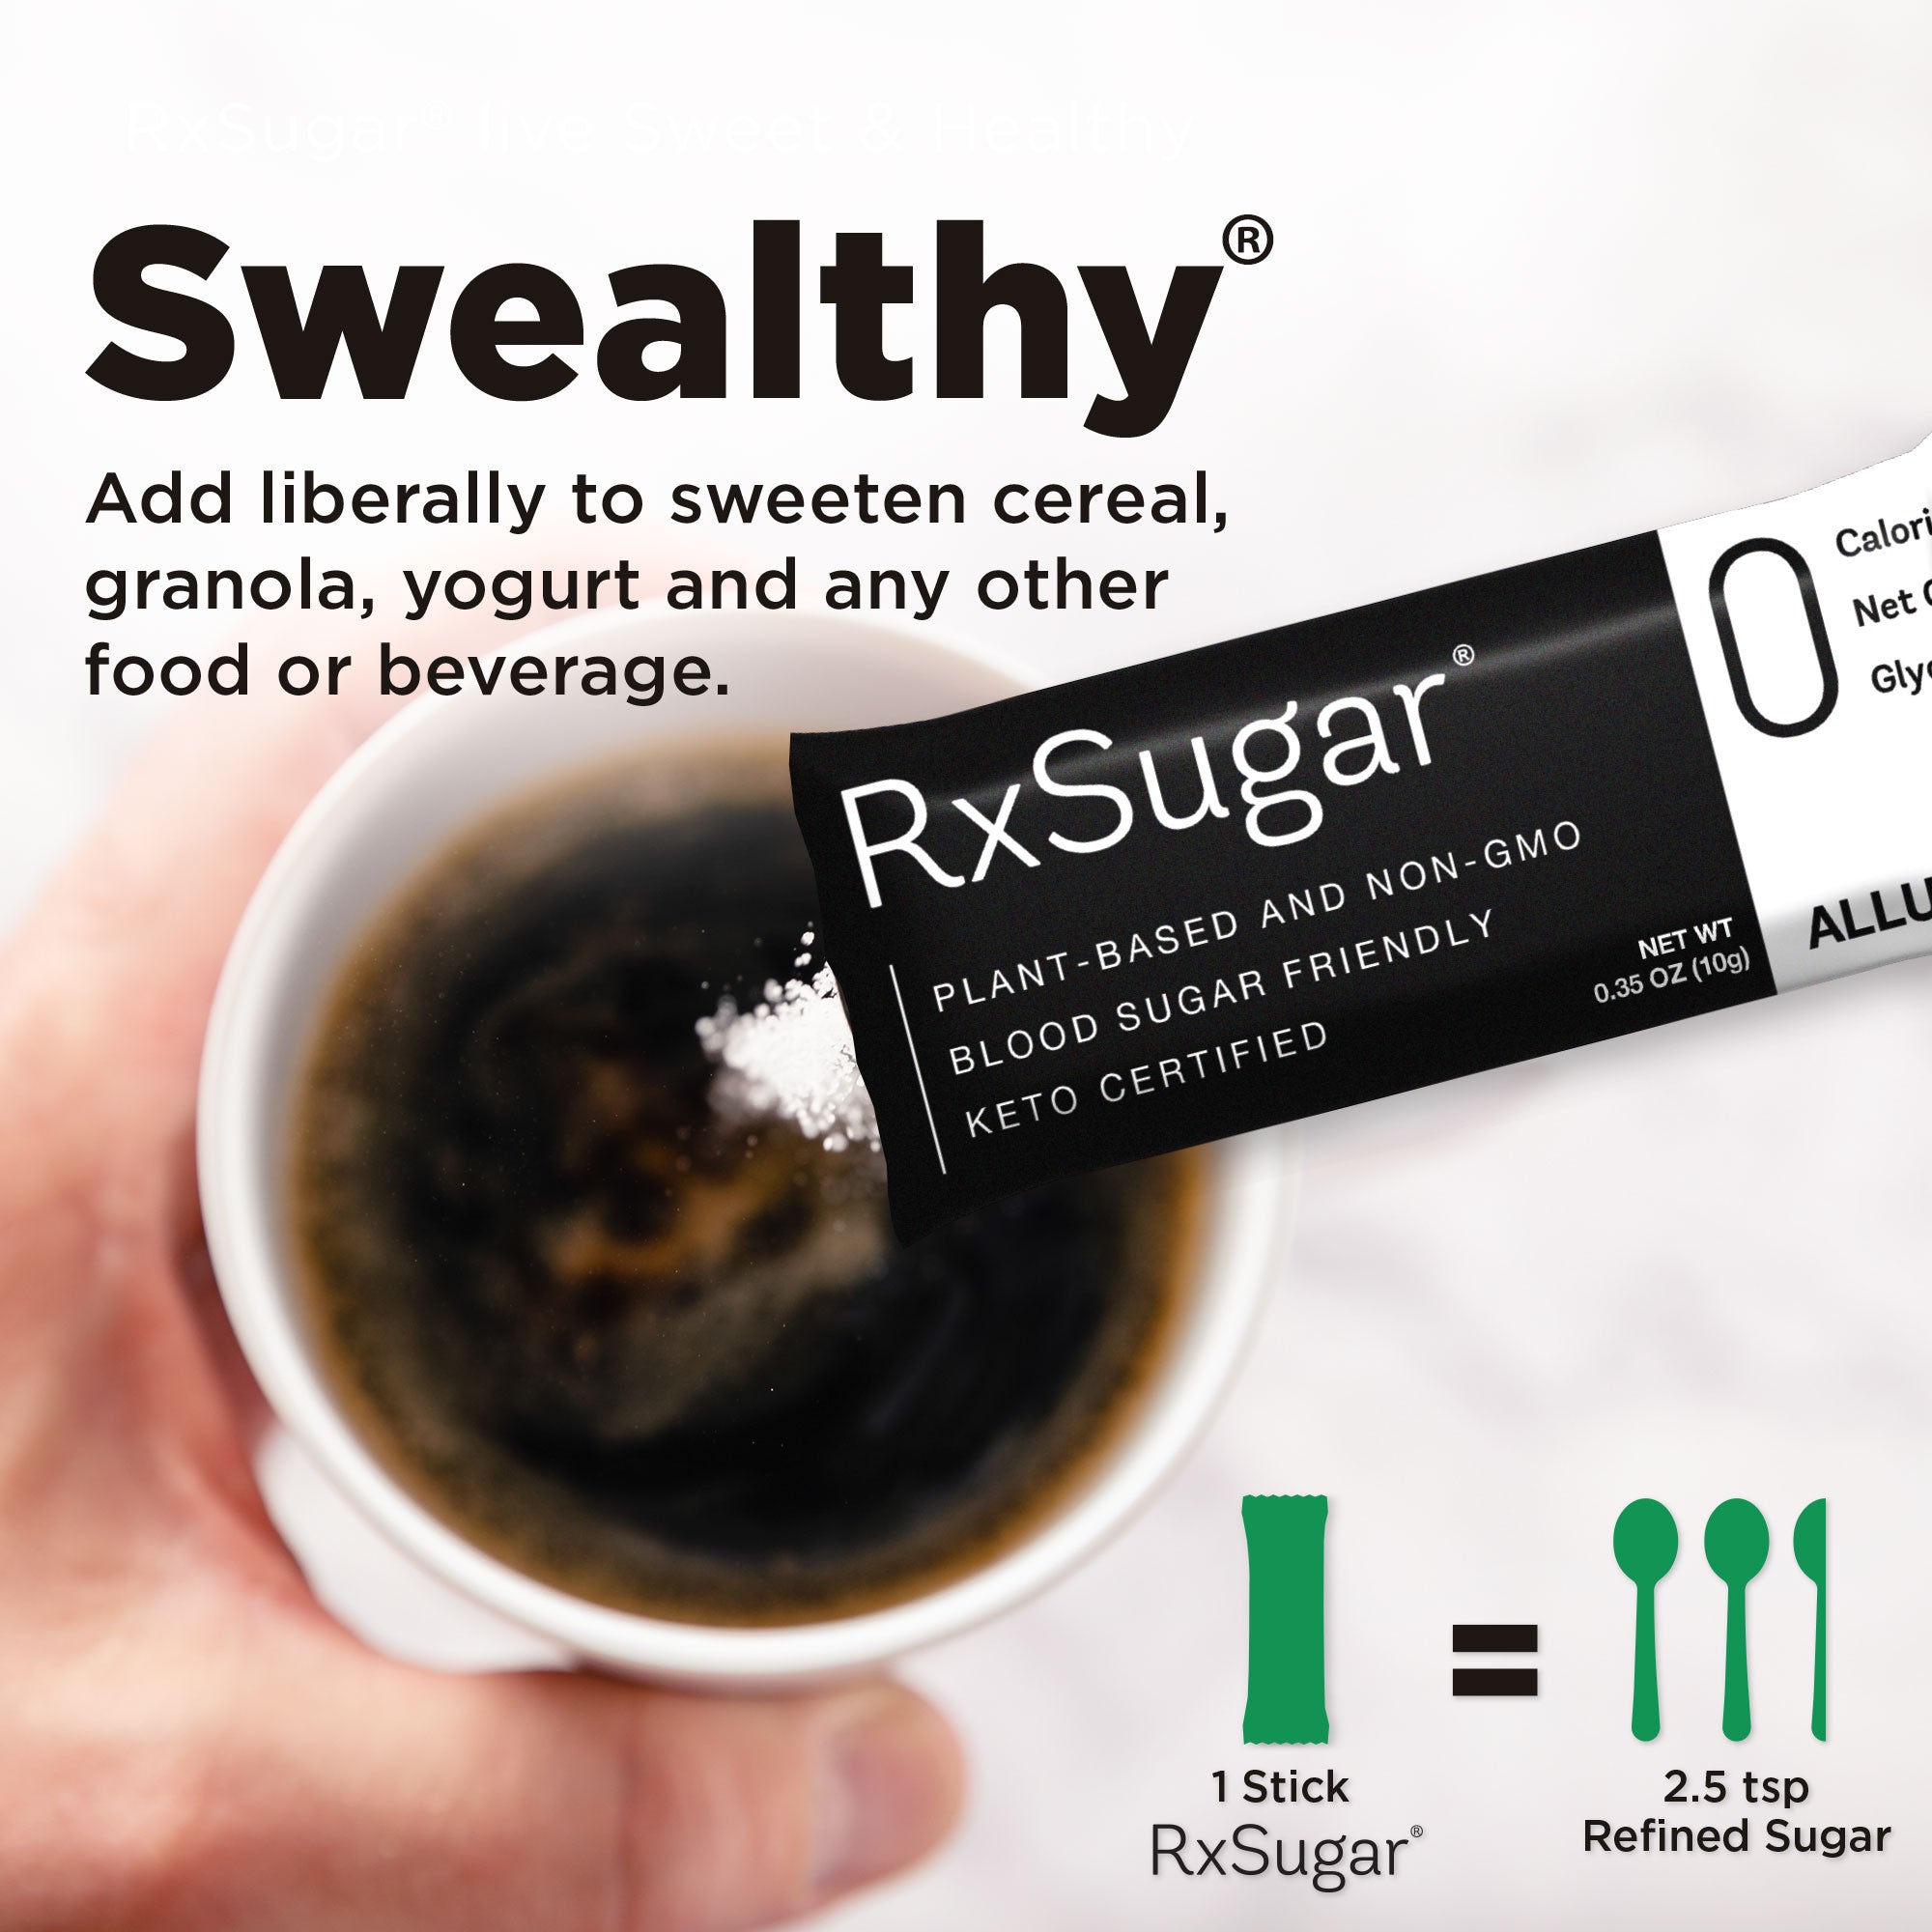 Swealthy - Add liberally to sweeten cereal, granola, yogurt and any other food or beverage. RxSugar 1 stick is 2.5 tsp refined sugar.